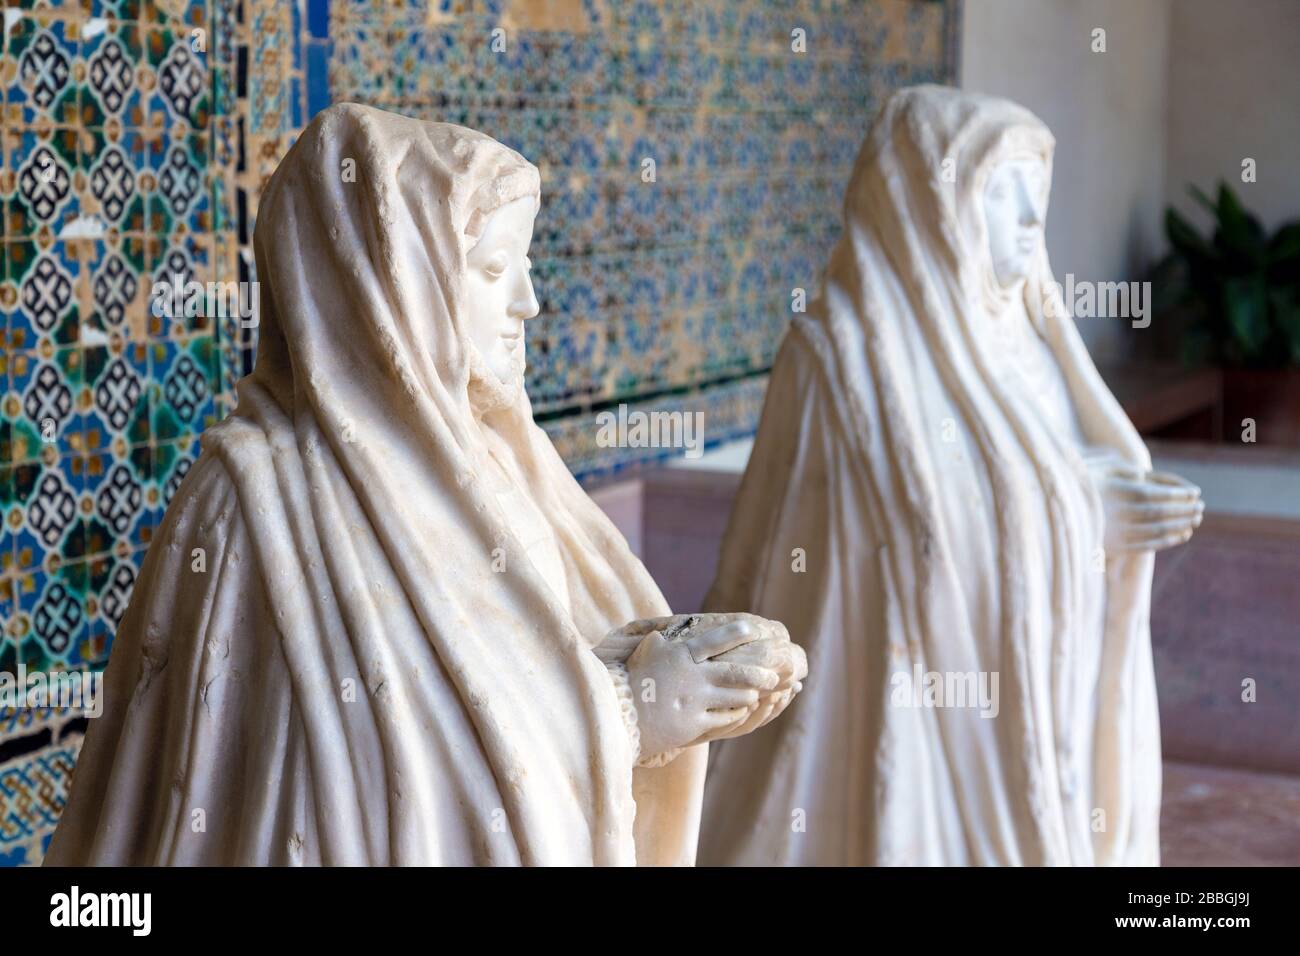 Sculptures of nuns praying at Andalusian Museum of Contemporary Art and former Monastery of Santa Maria de las Cuevas, Seville, Spain Stock Photo